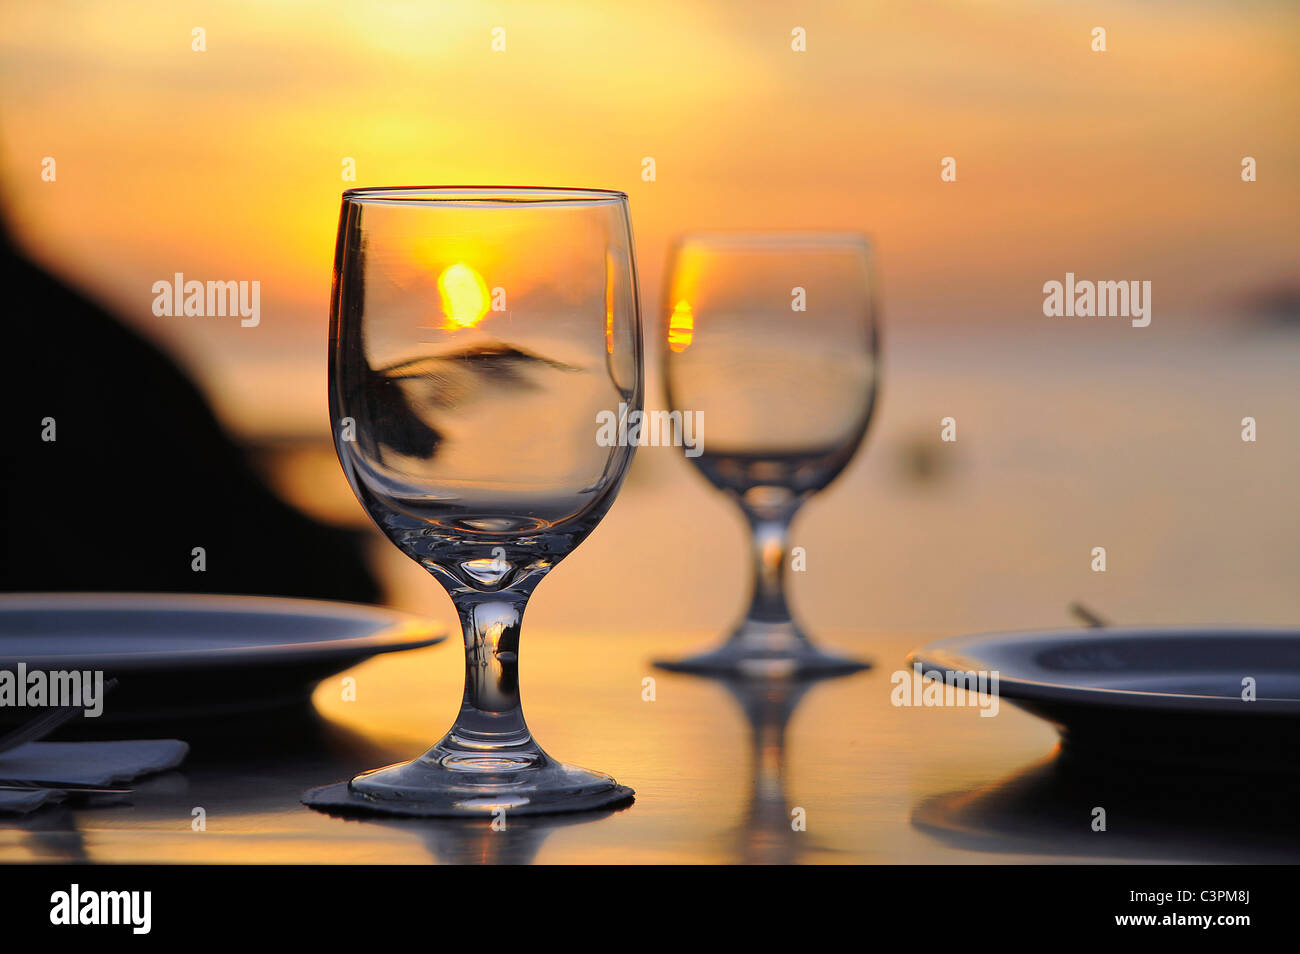 Wine glasses on table at sunset, close-up Stock Photo